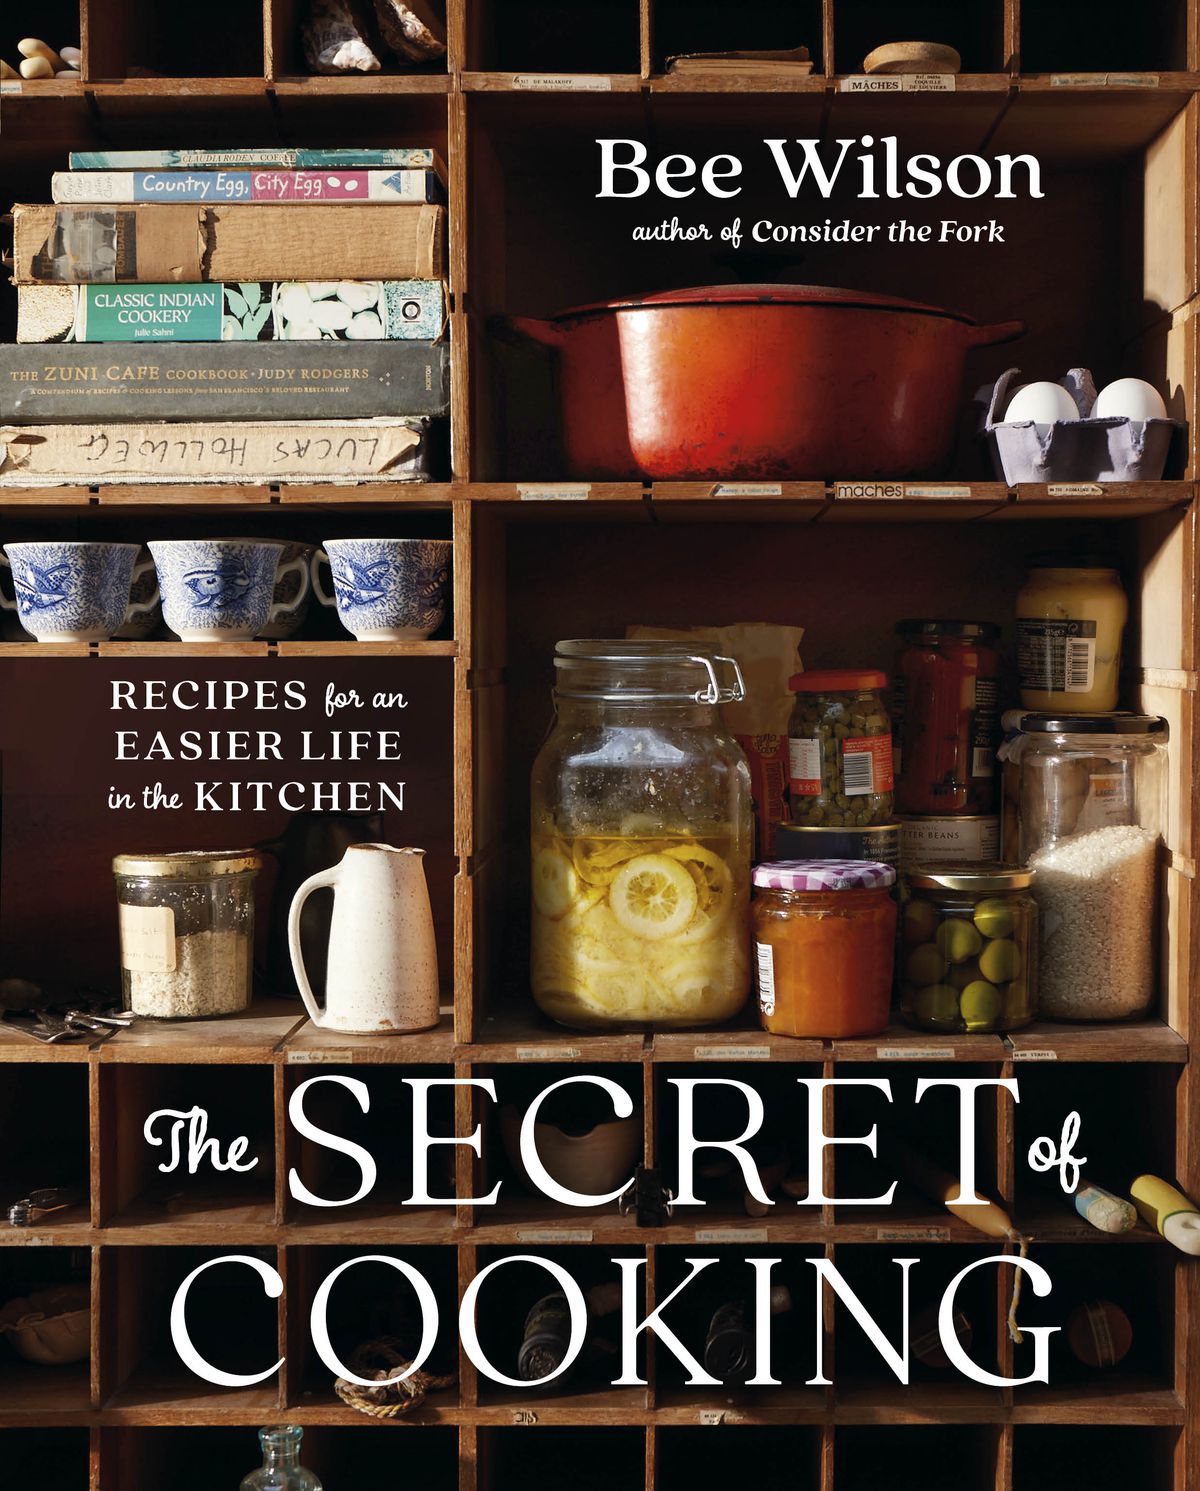 The cover of Bee Wilson’s The Secret of Cooking